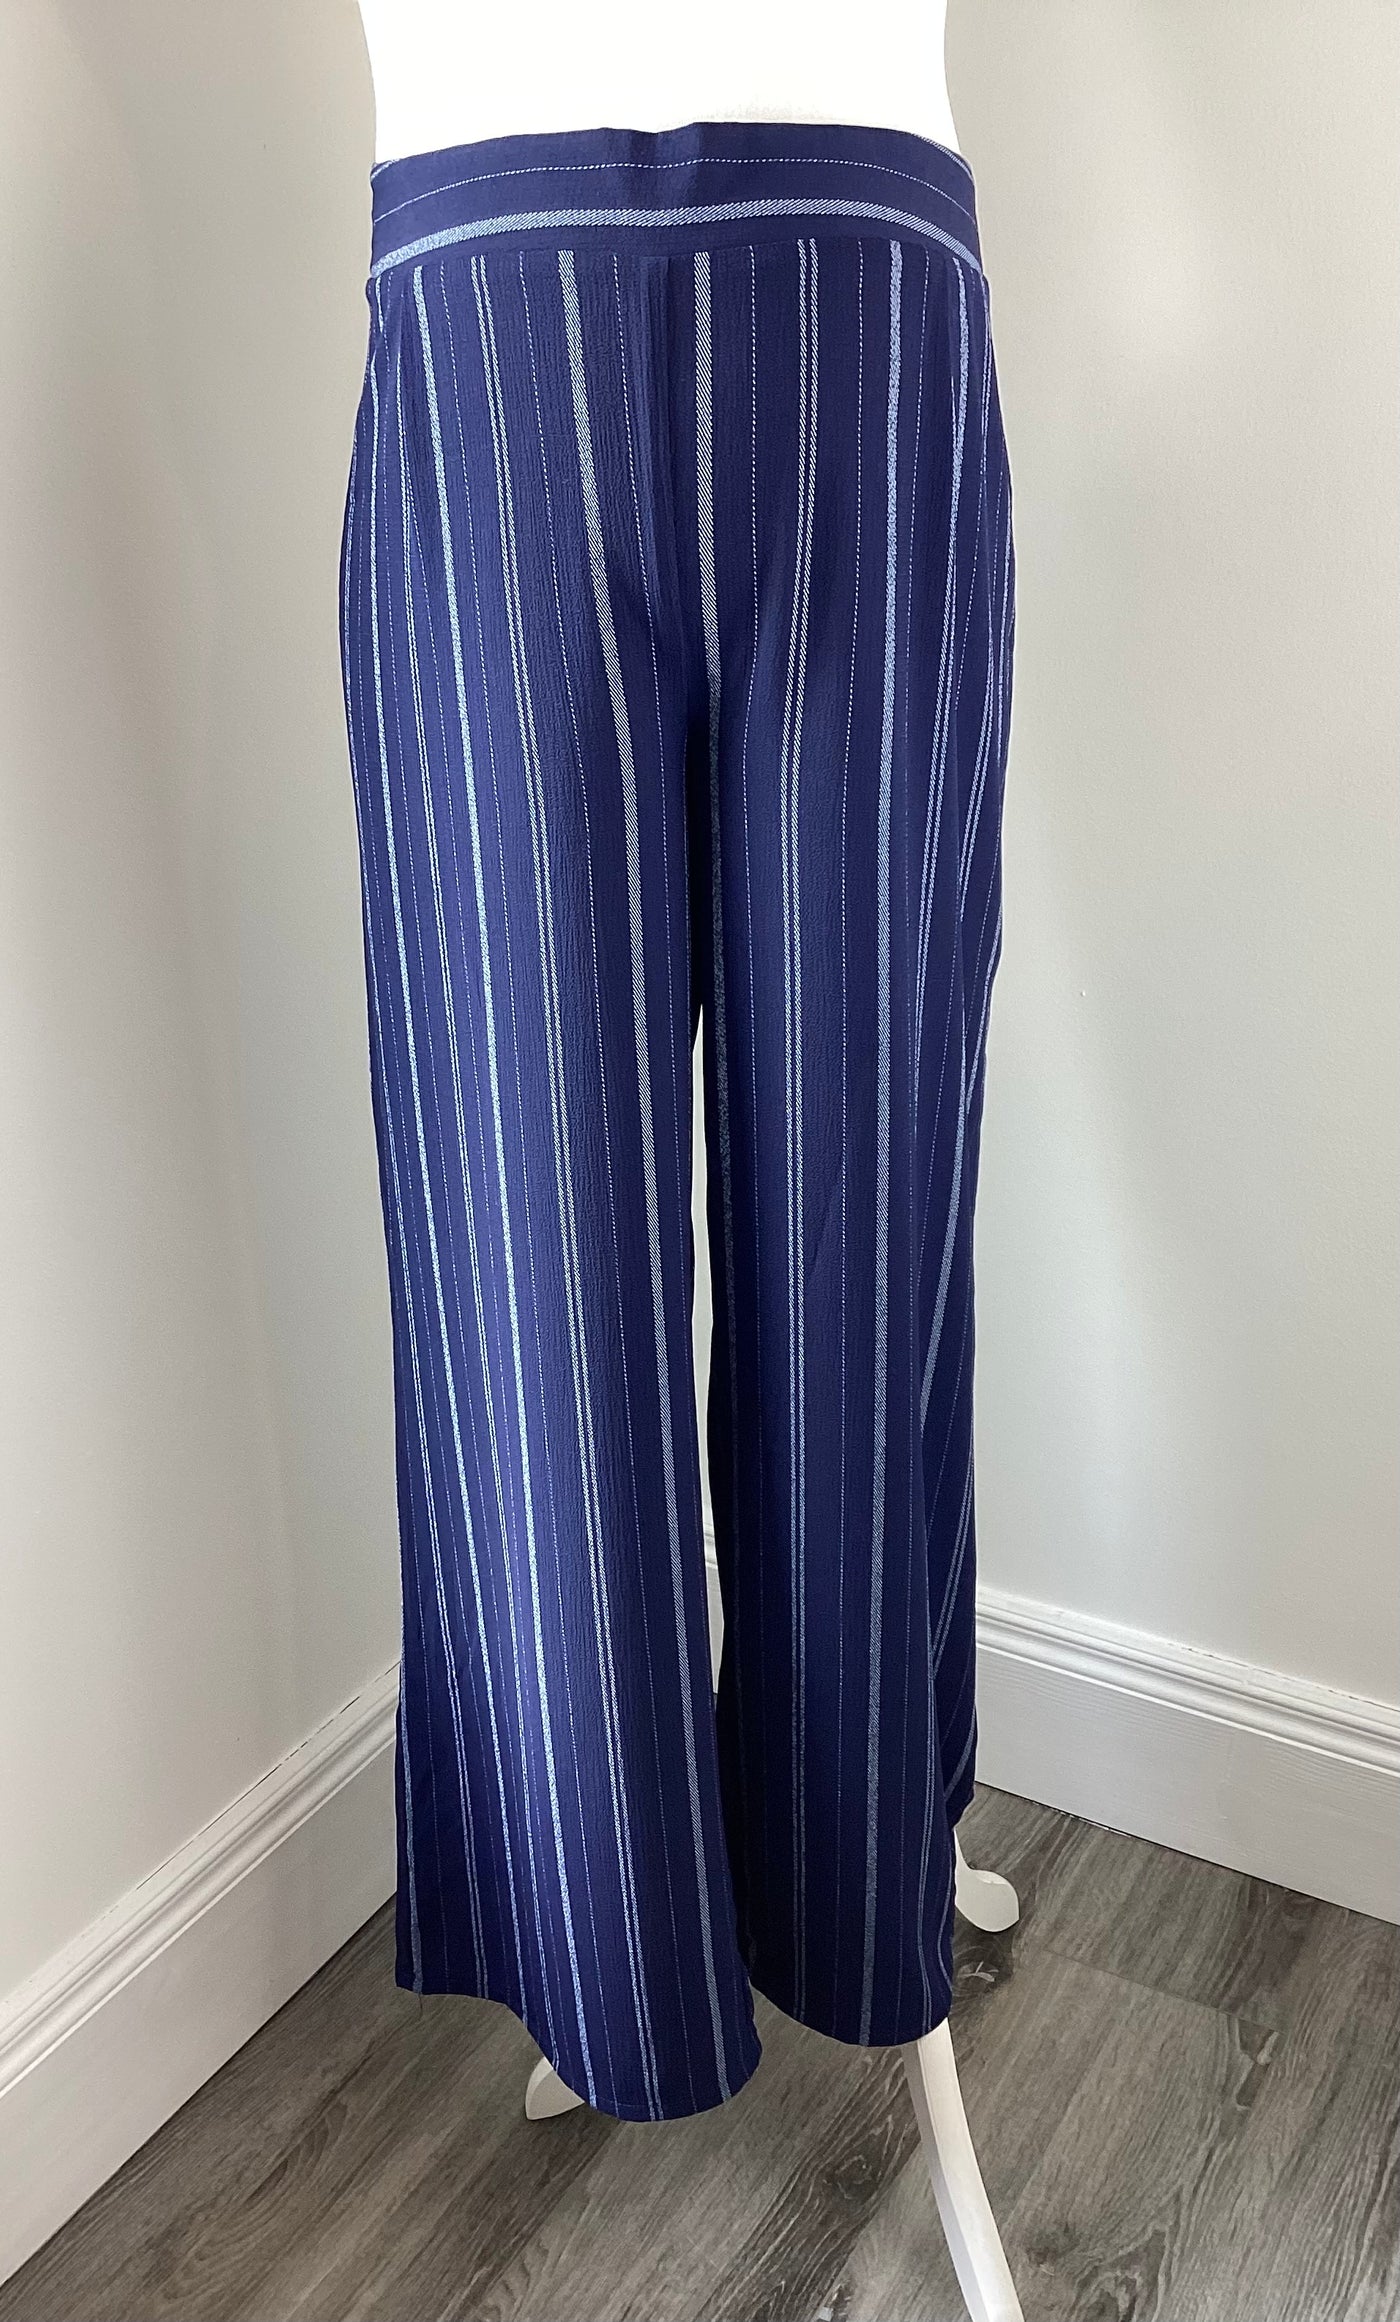 New Look Maternity navy & white stripe summer trousers - Size 16